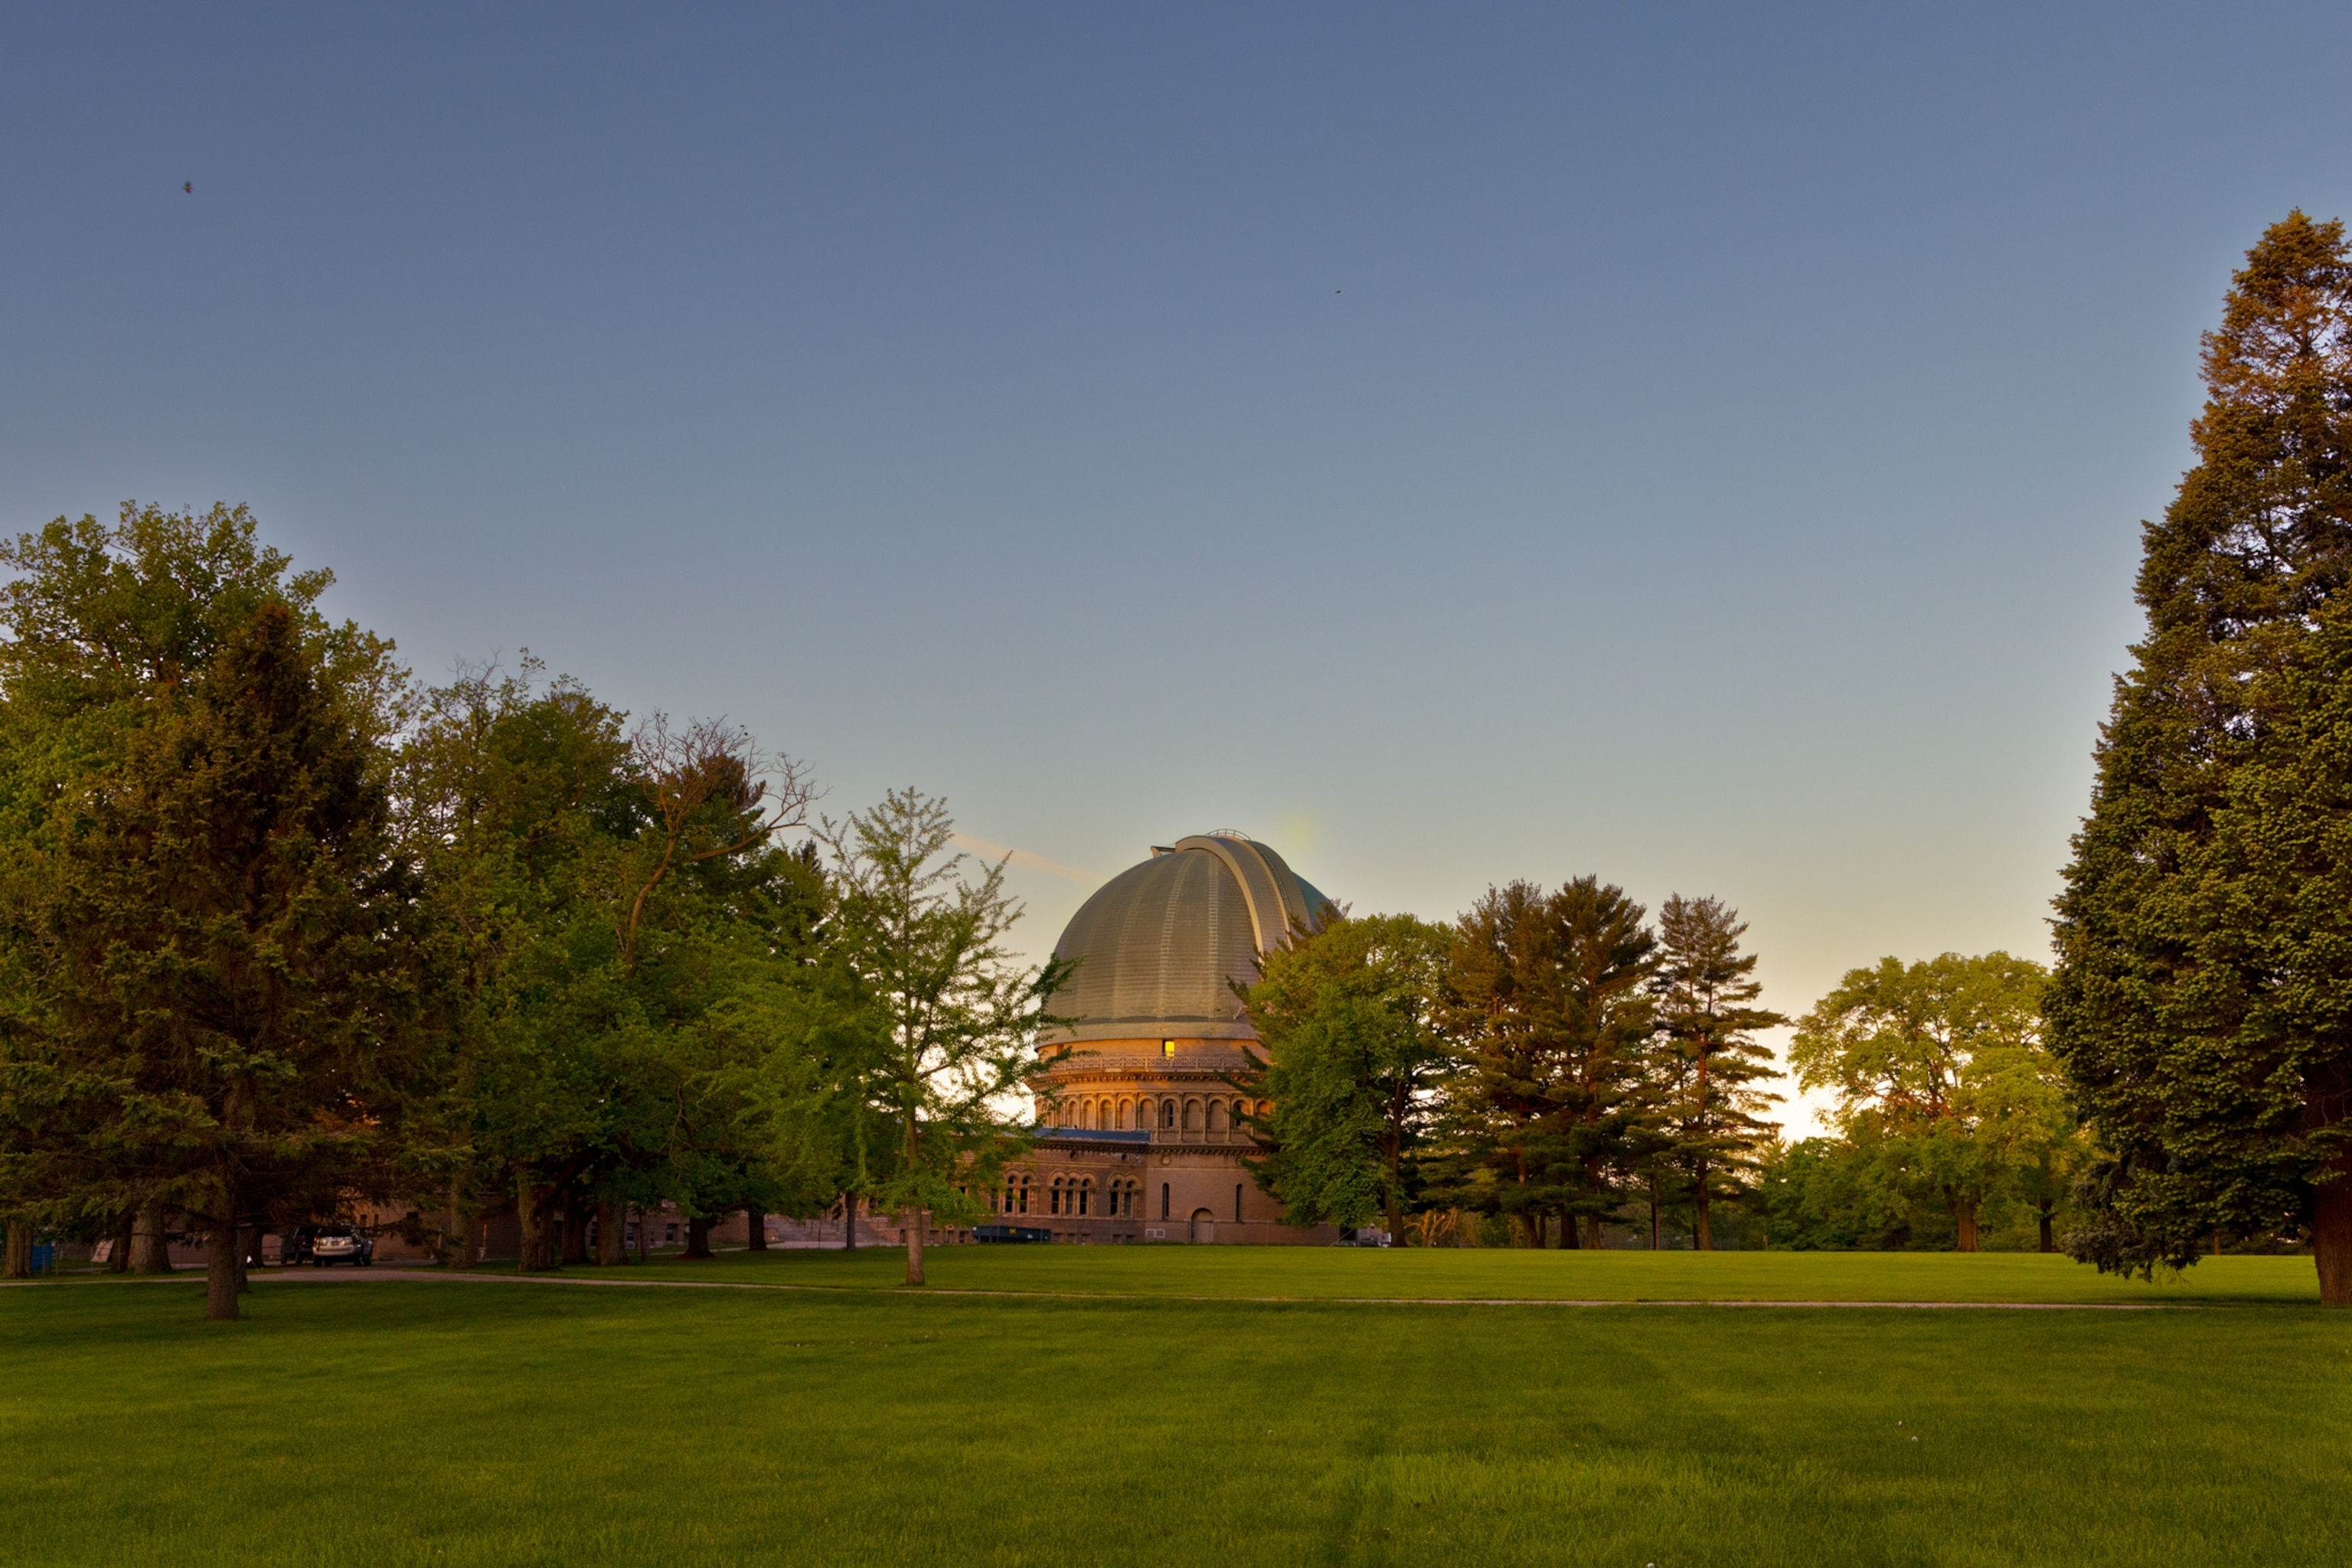 Sunrise behind observatory and perfectly green lawn in front of it surrounded by trees.